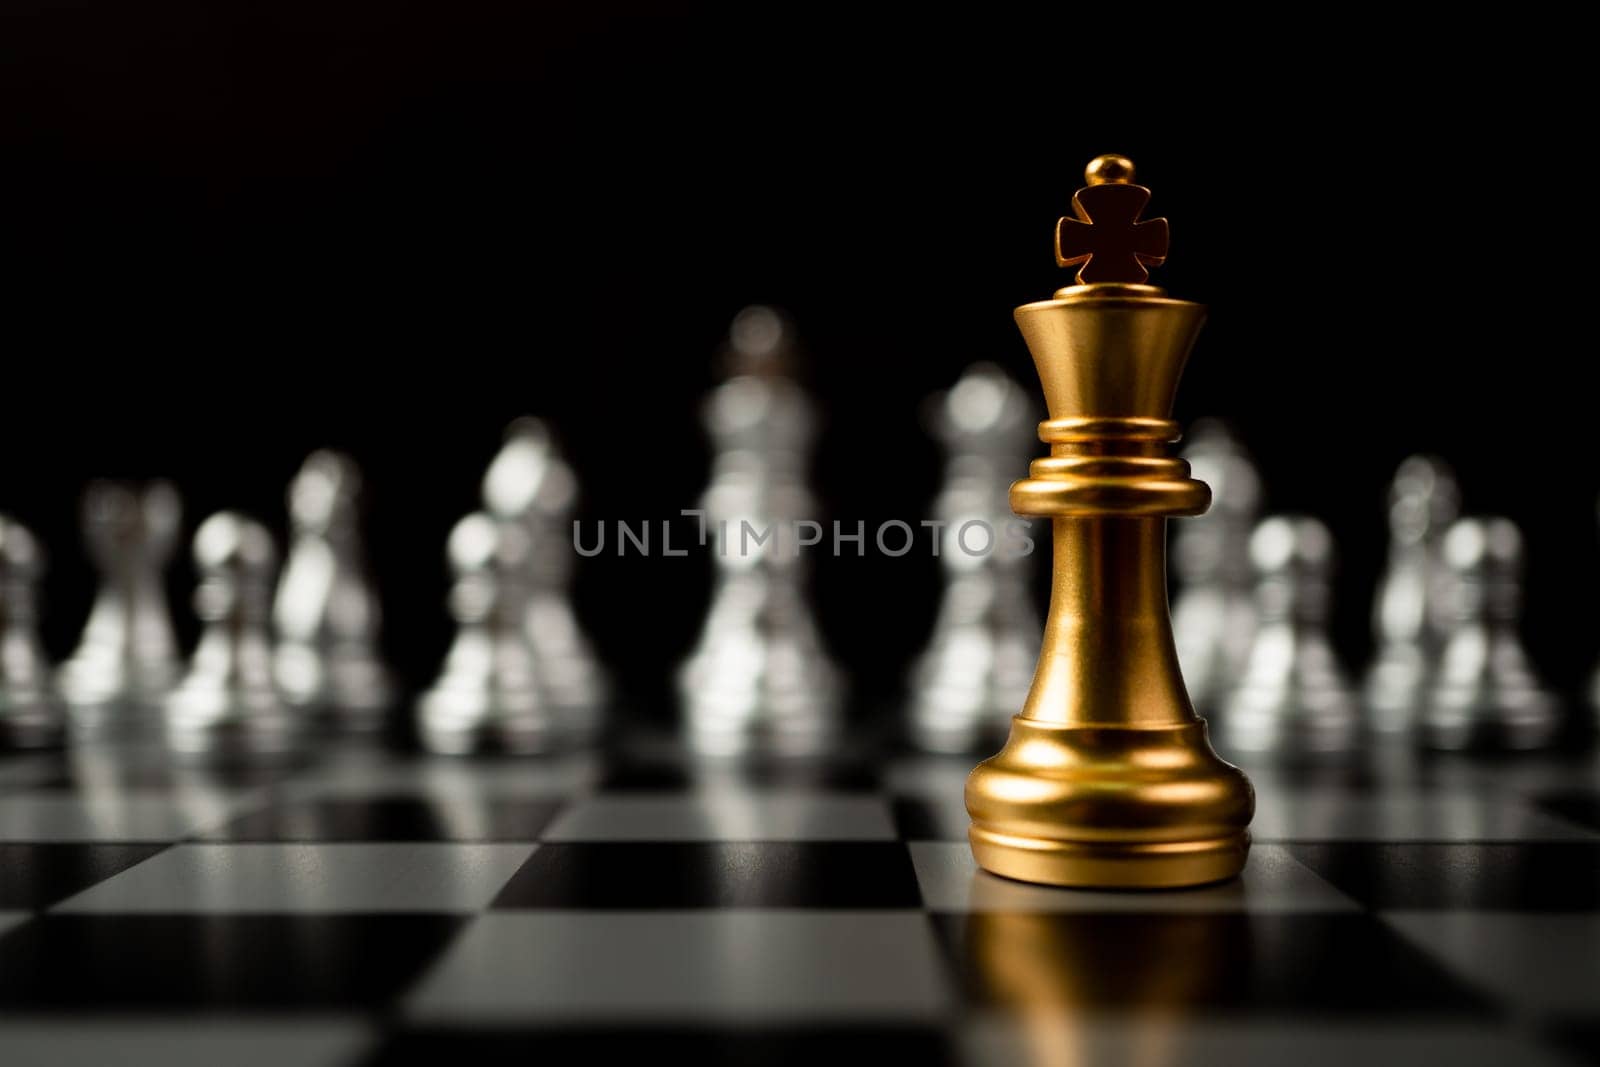 Golden King chess standing in front of other chess, Concept of a leader must have courage and challenge in the competition, leadership and business vision for a win in business games